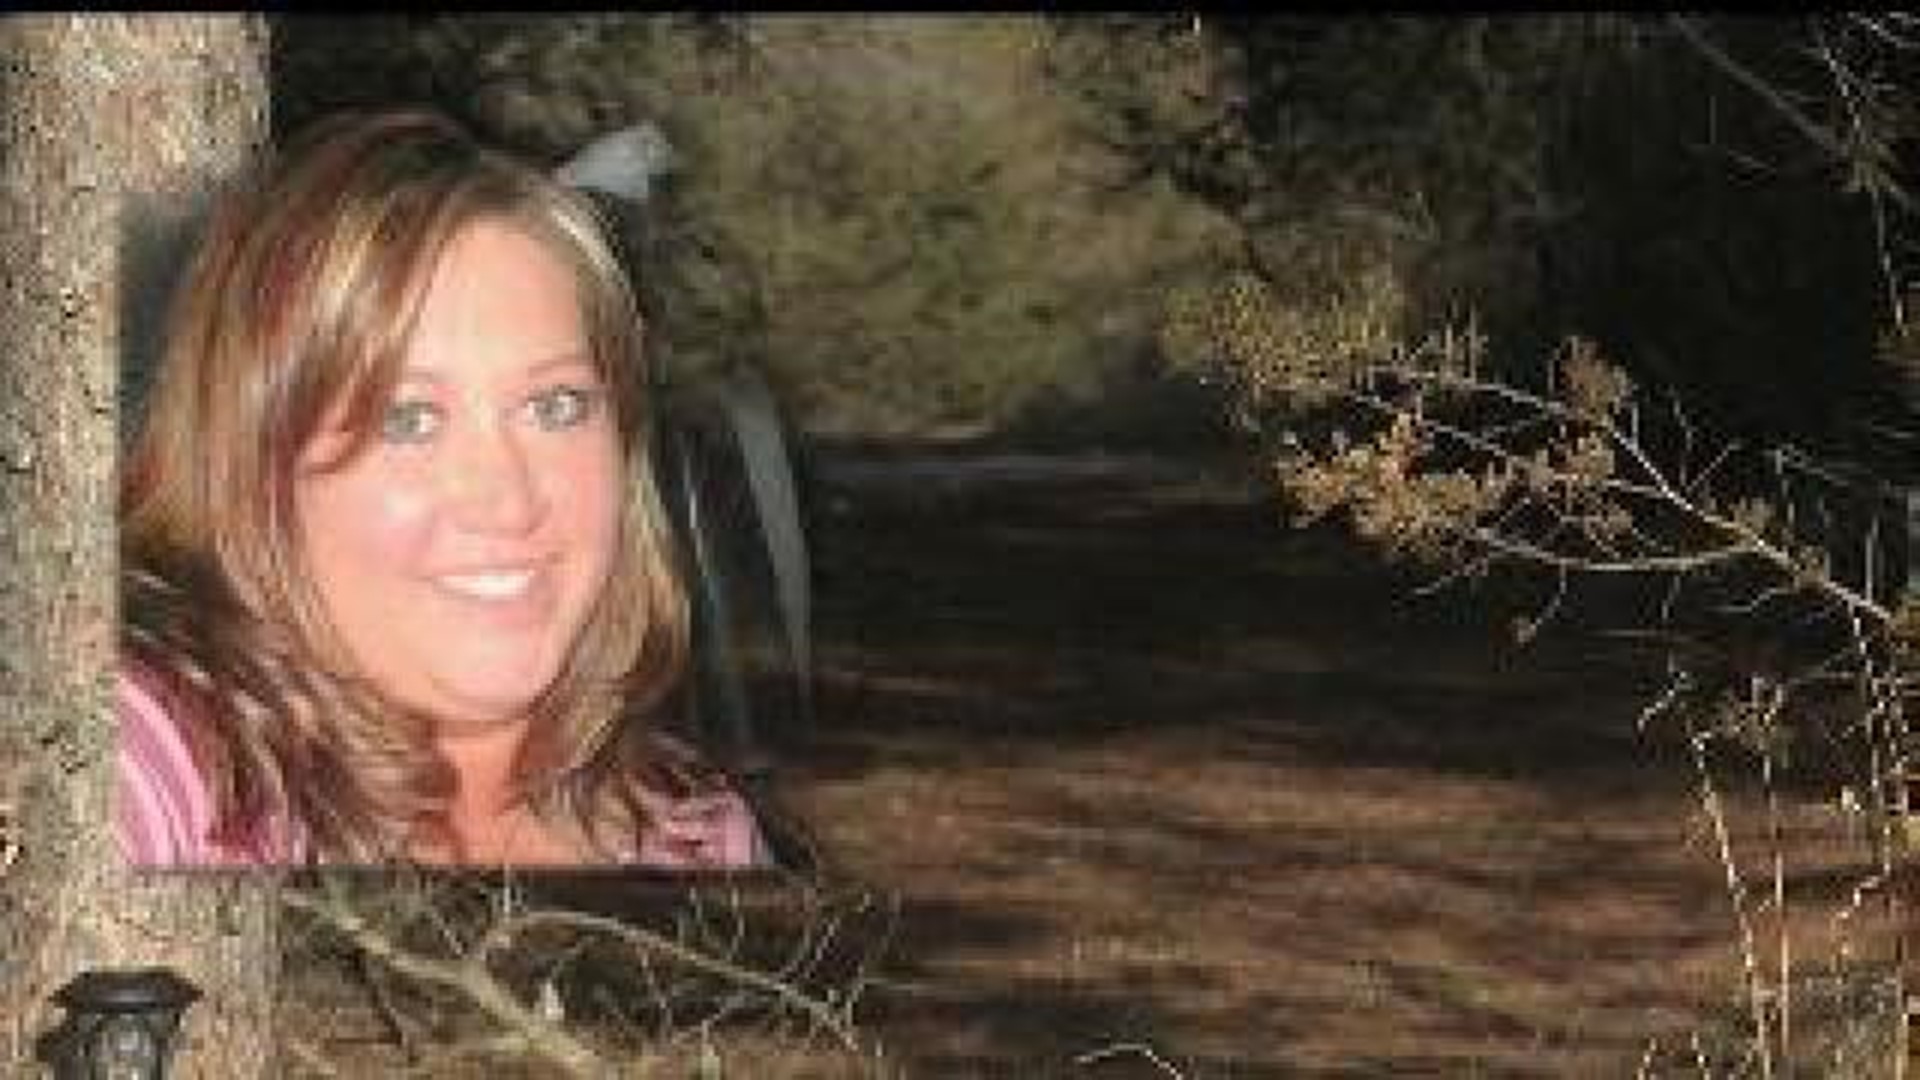 Minnesota neighbors shocked at discovery of Carrie Olson